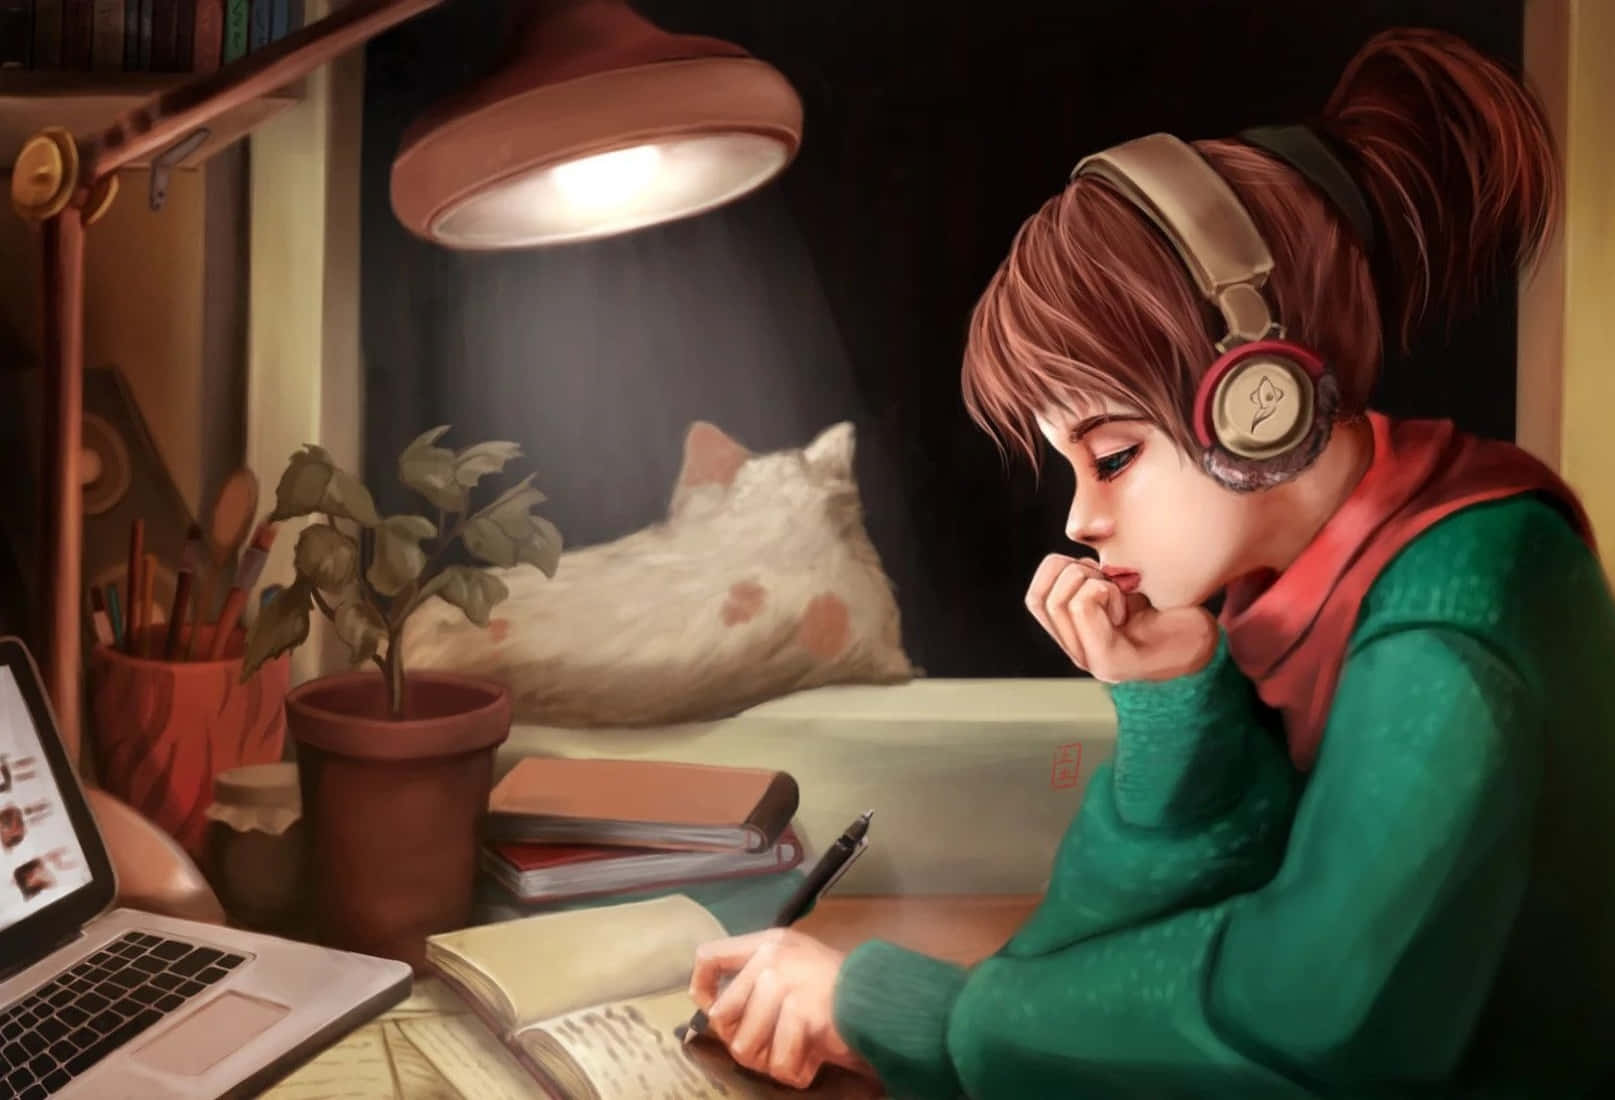 A Girl Is Sitting At A Desk With Headphones On And A Laptop